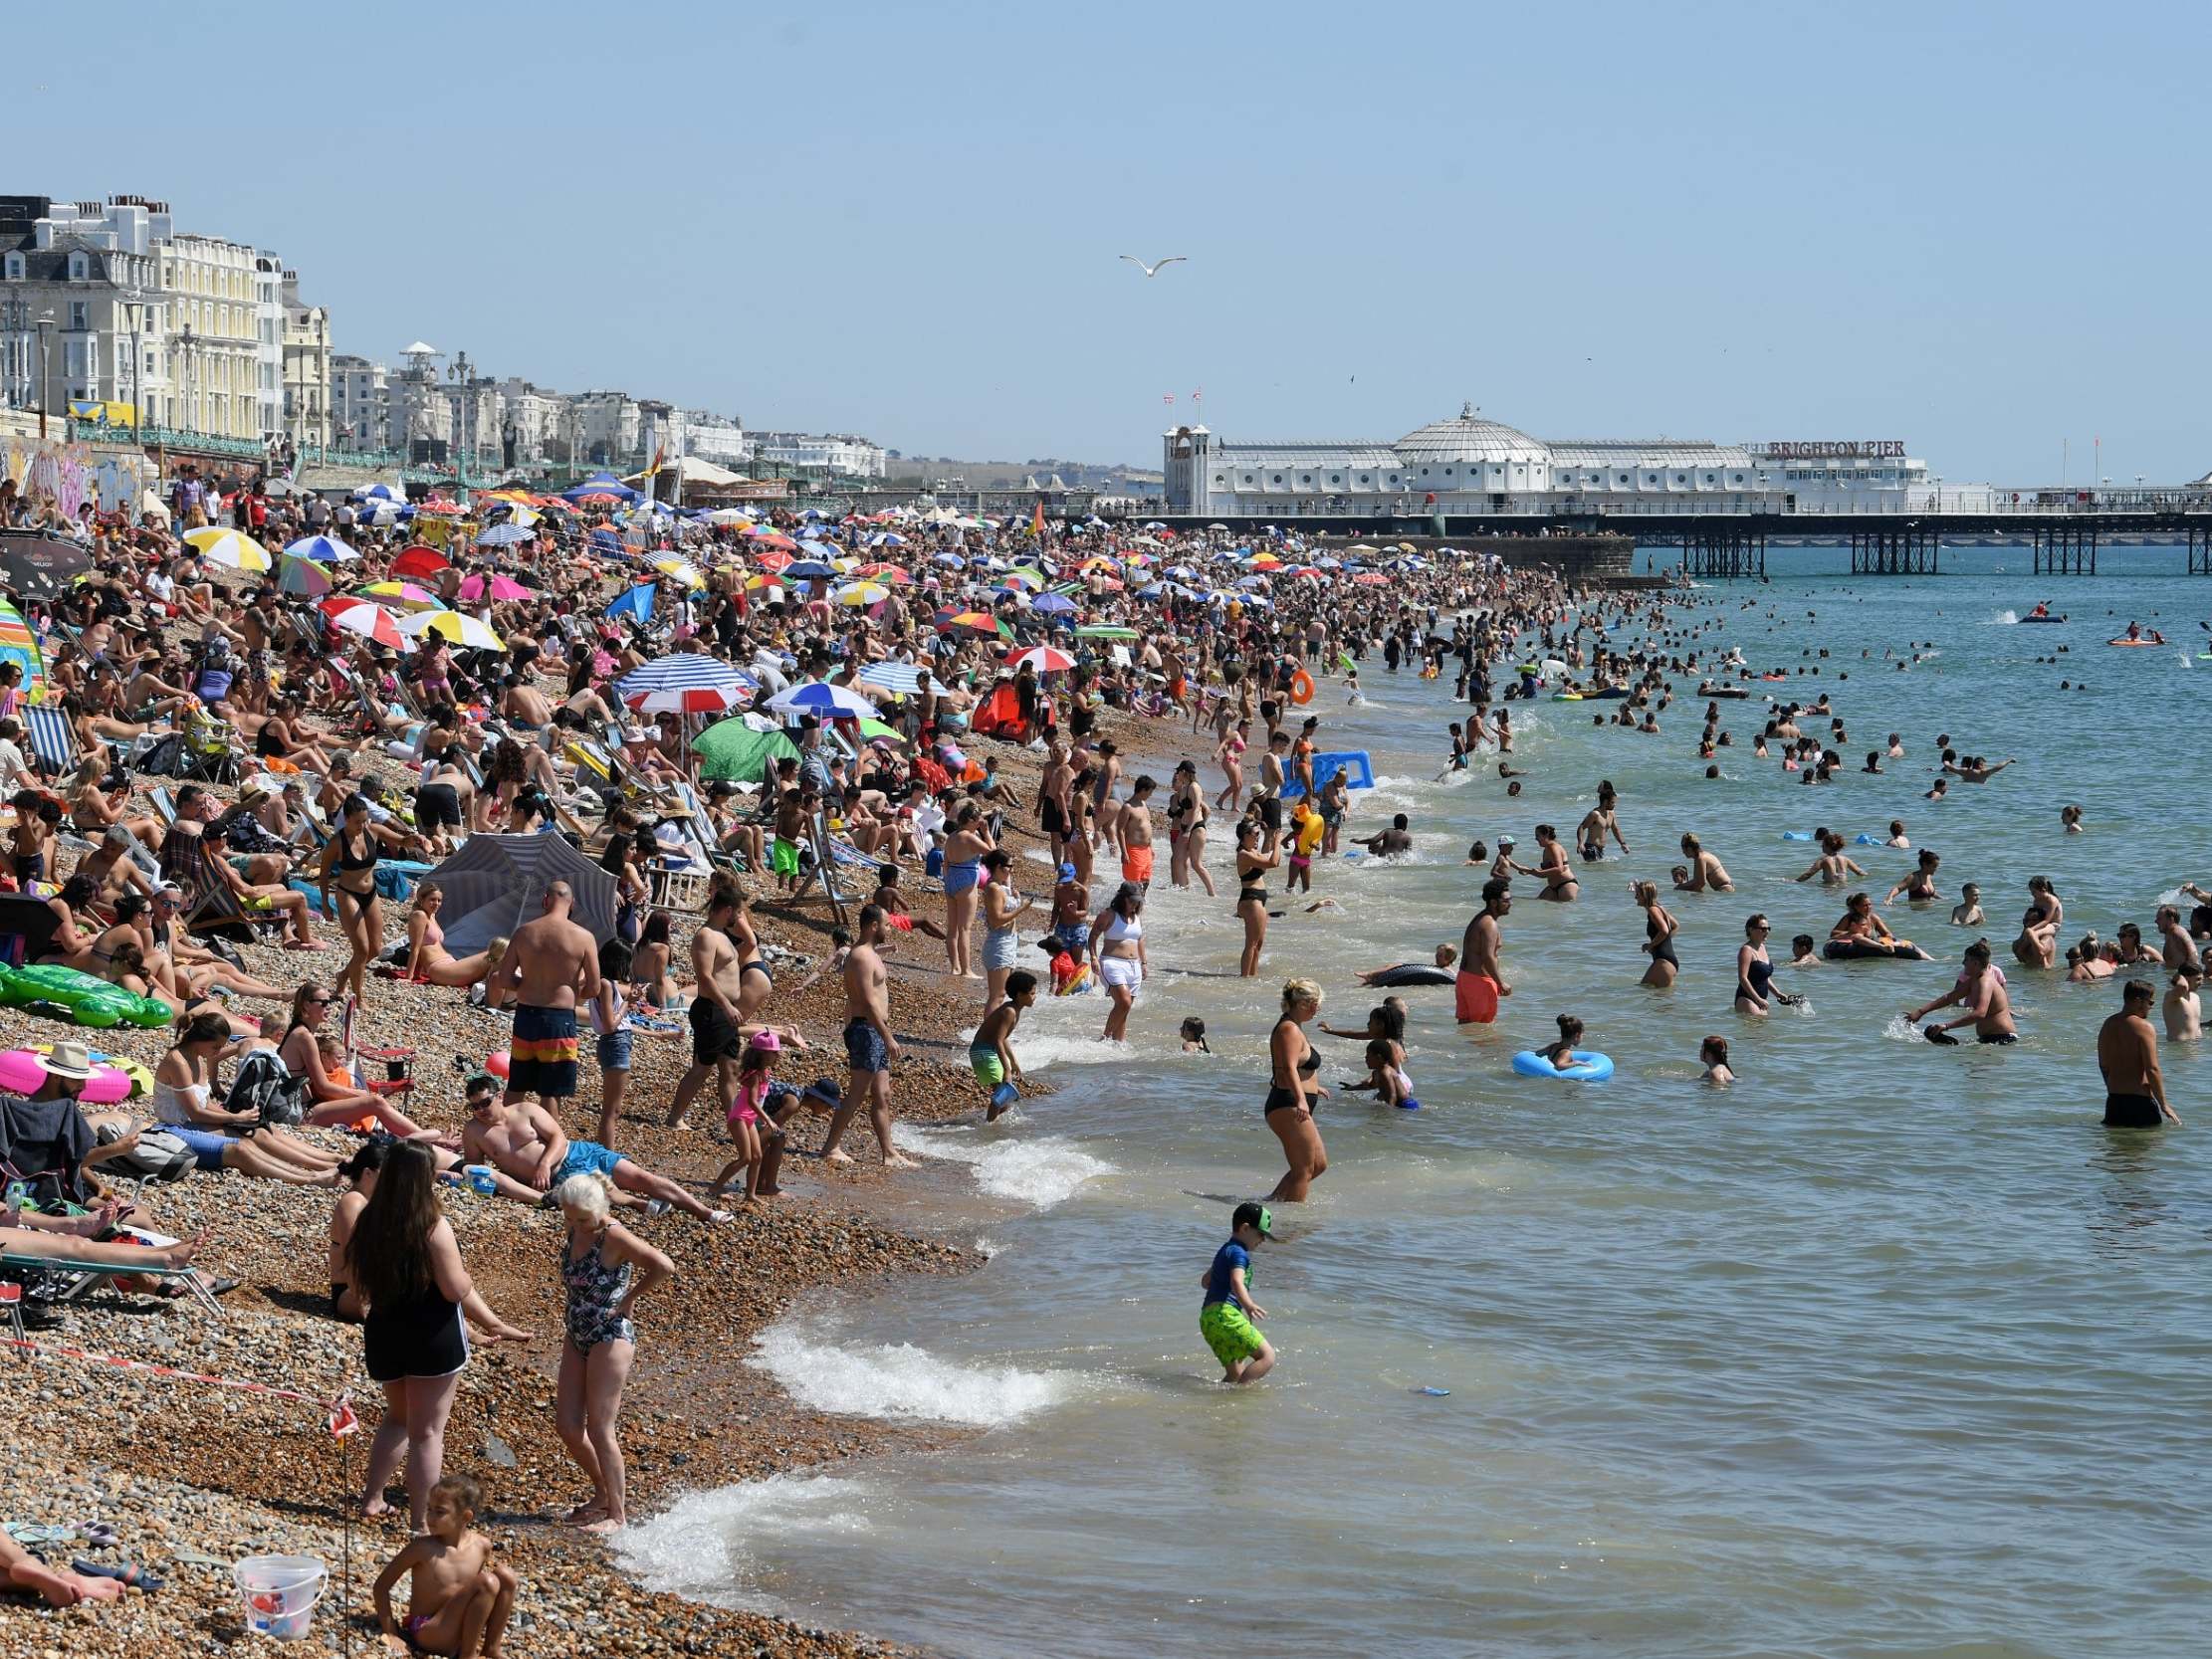 UK weather: England sees hottest August day for 17 years as heatwave set to continue into next week